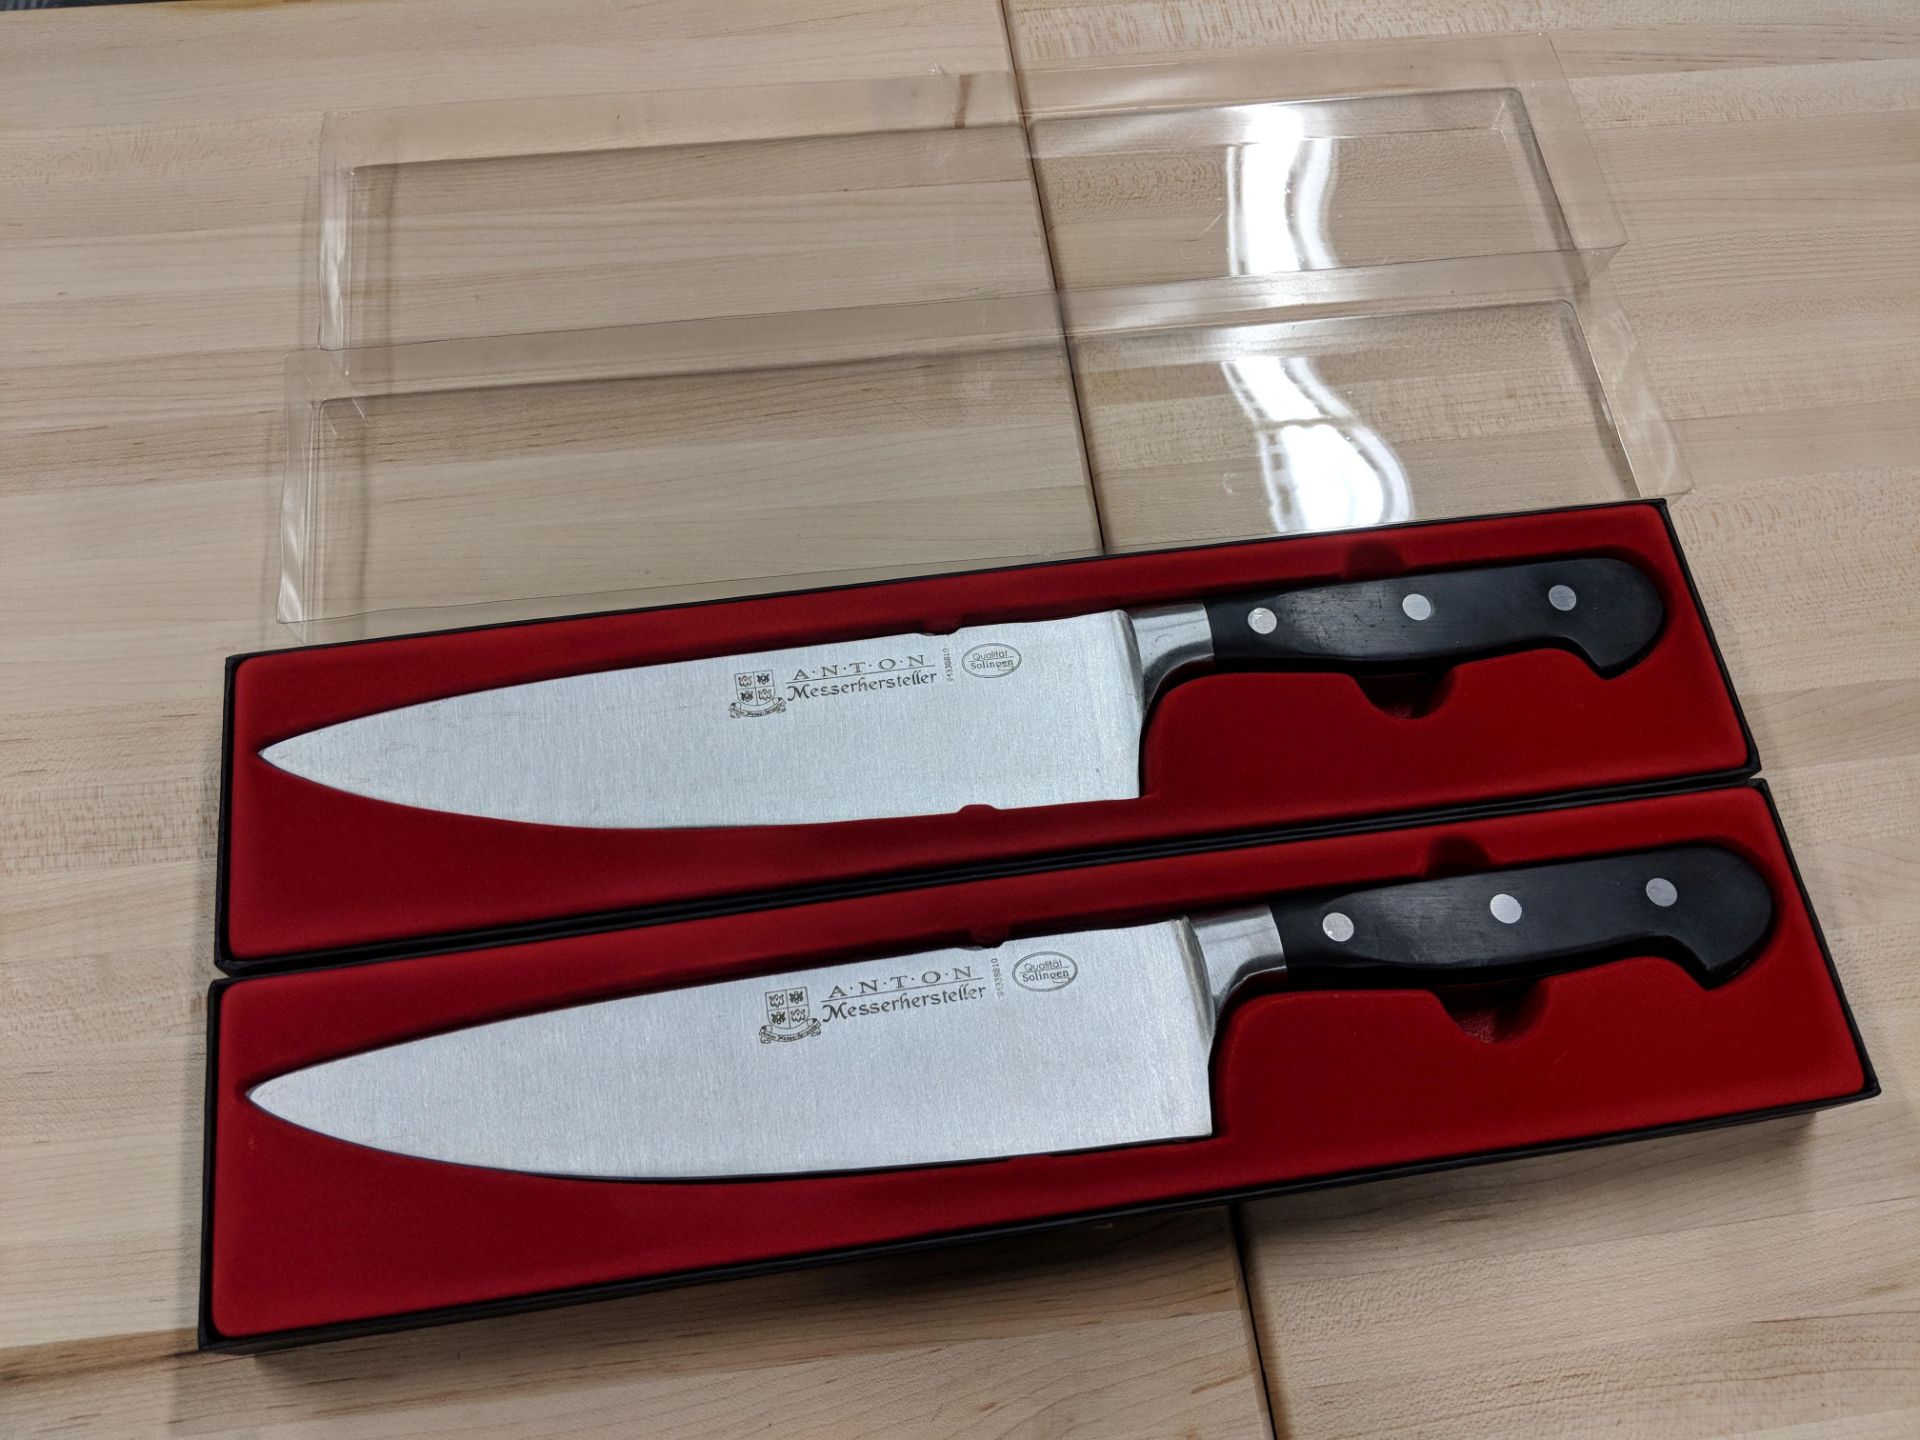 8” Premium Anton Medium Forged Cook's Knives - Lot of 2 - Image 3 of 5